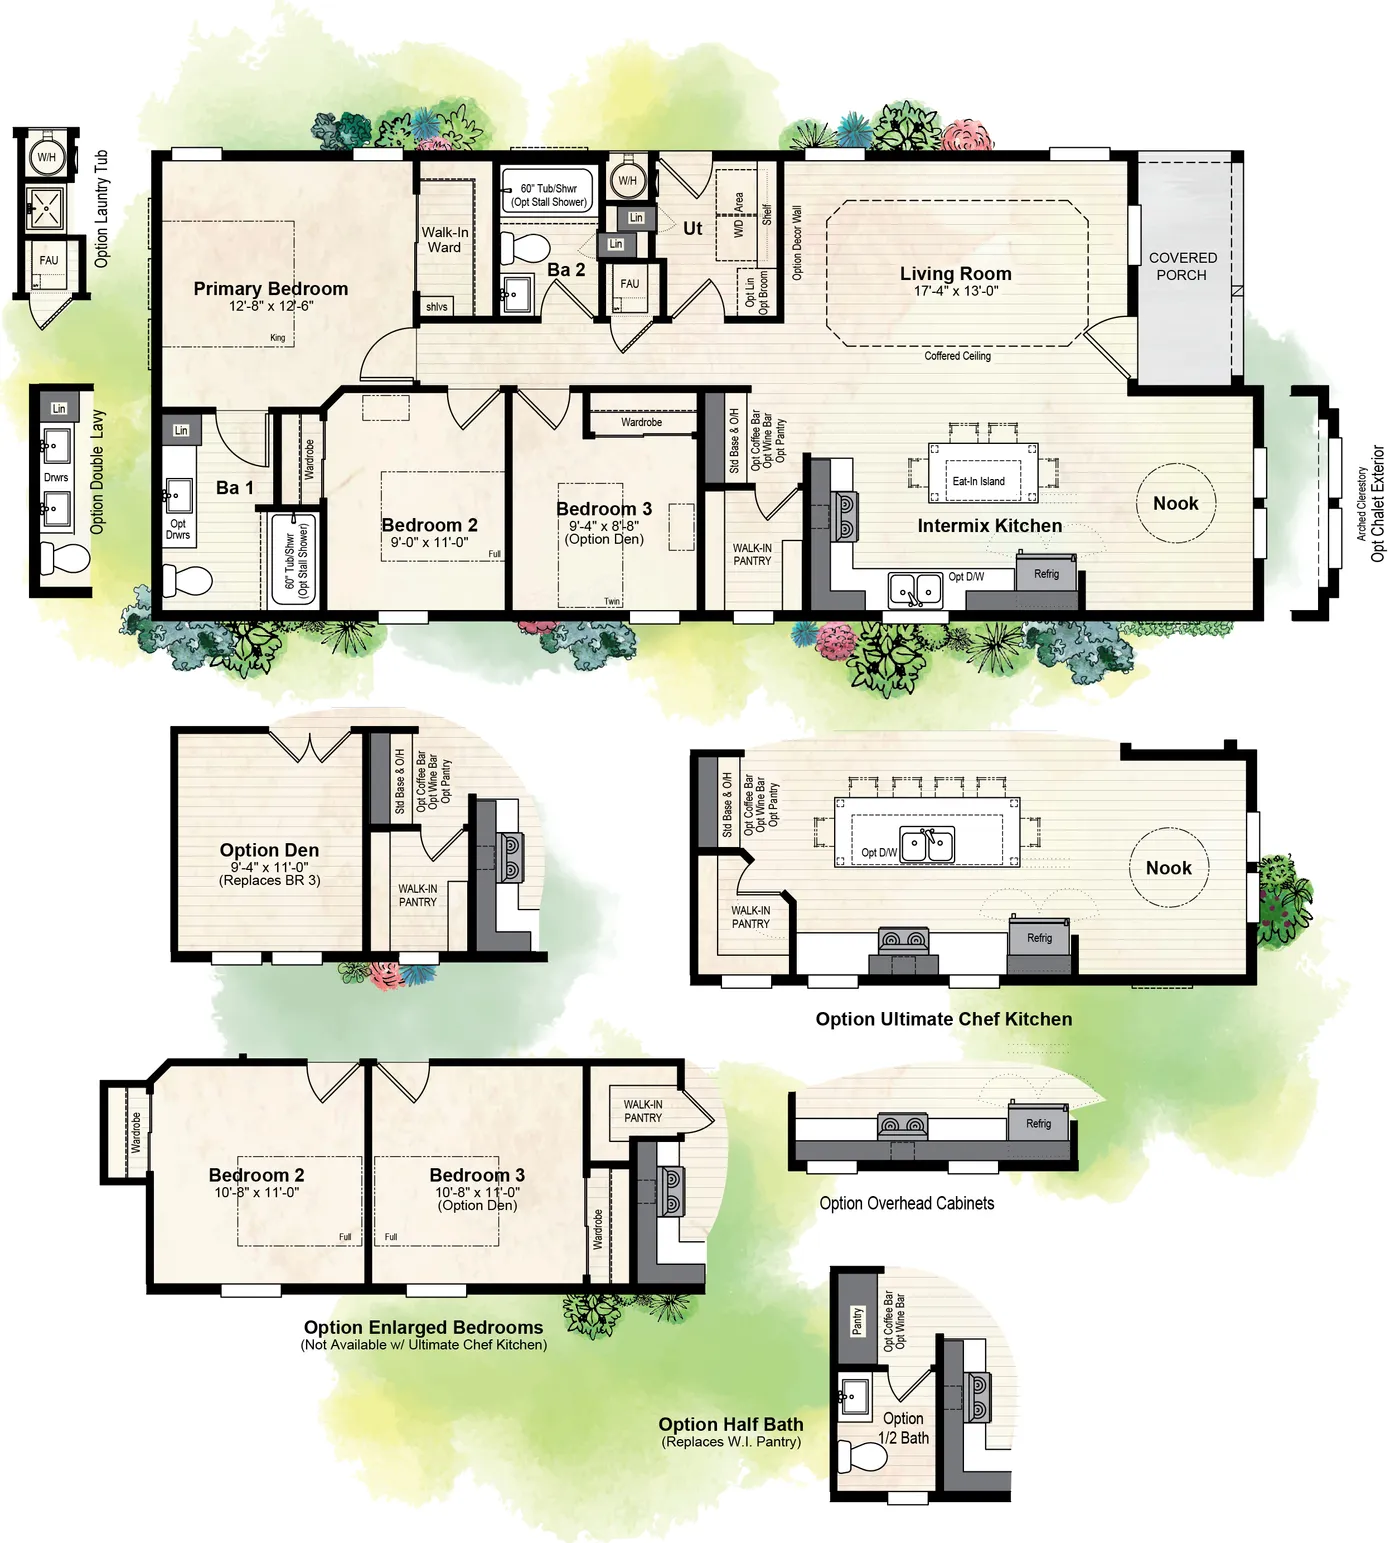 The GPII-2456-3B BRADBURY Floor Plan. This Manufactured Mobile Home features 3 bedrooms and 2 baths.